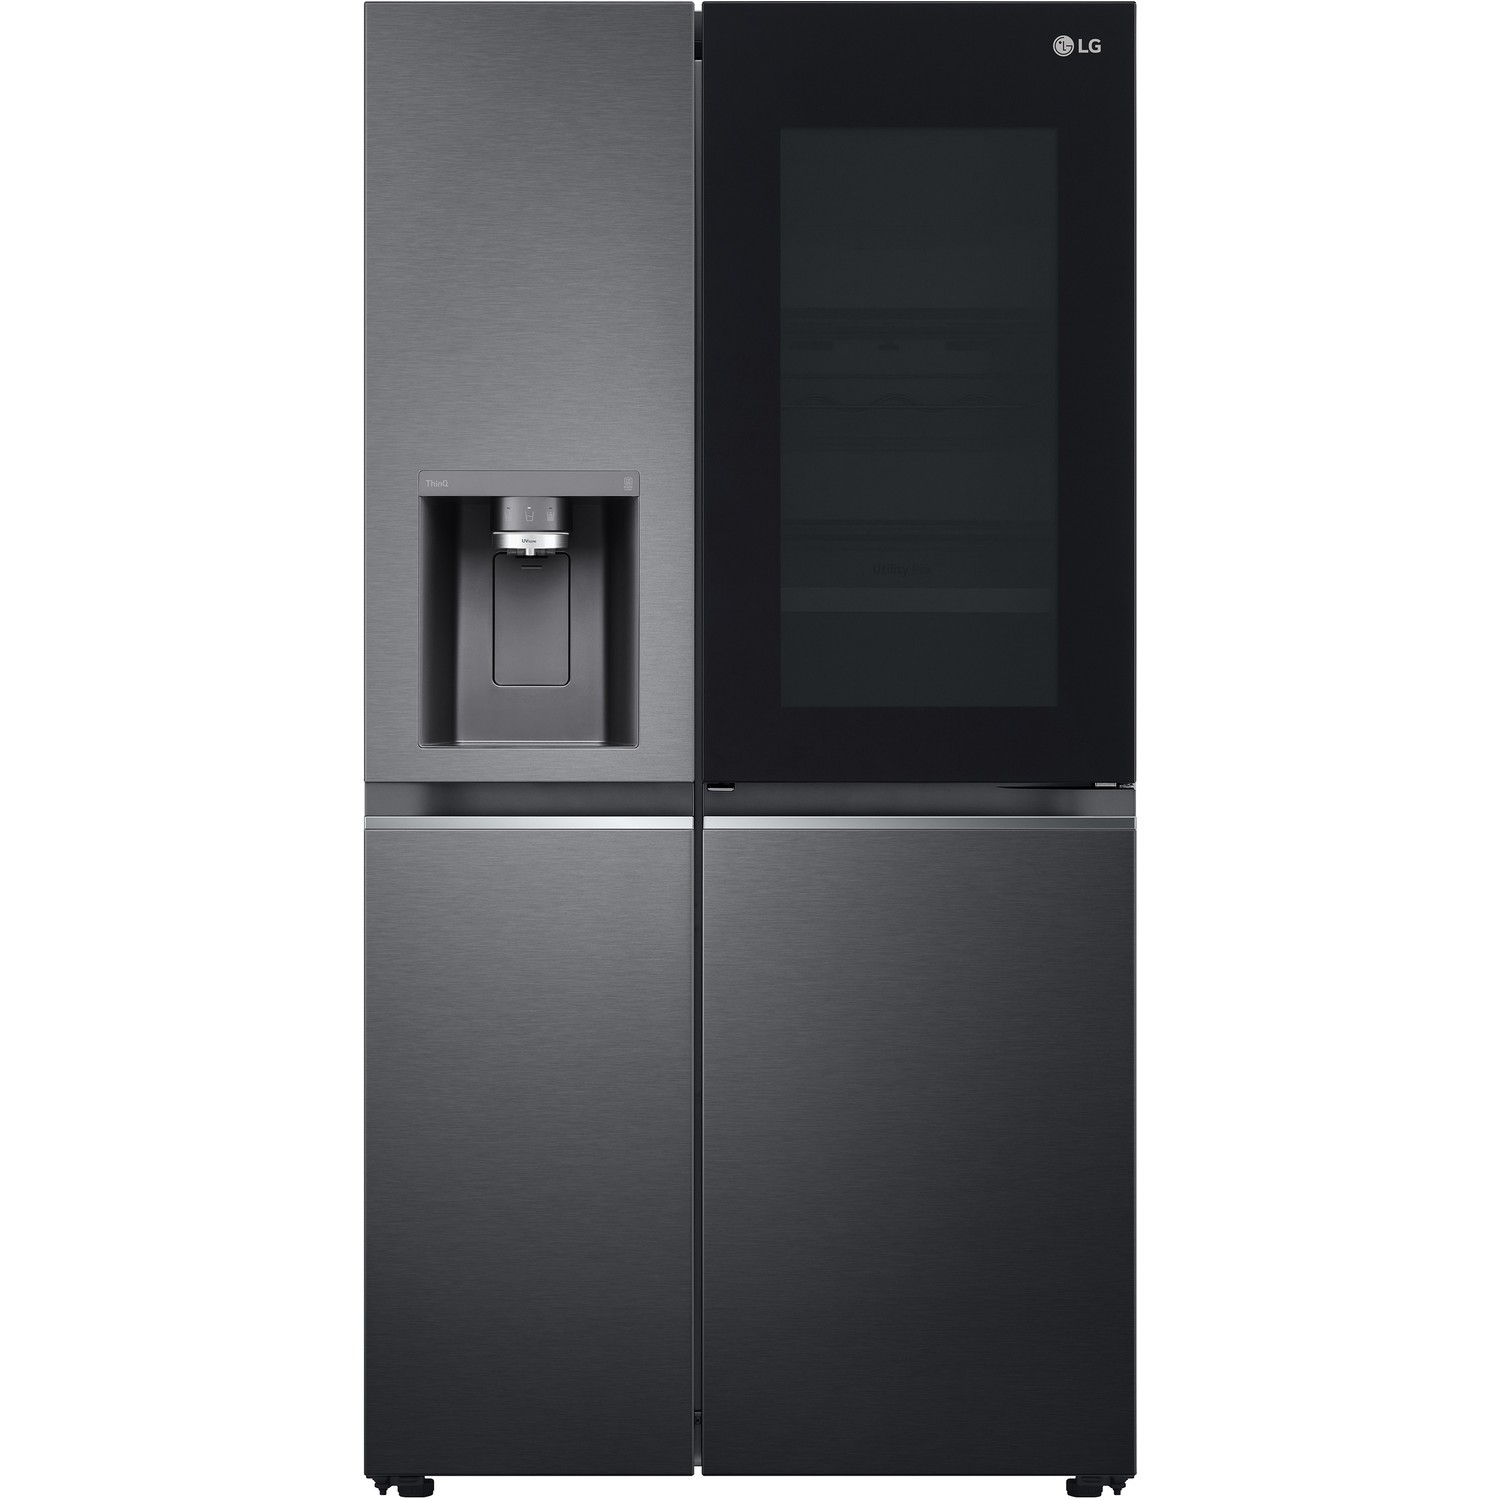 LG InstaView ThinQ American Fridge Freezer With Plumbed Ice And Water Dispenser - Matte Black